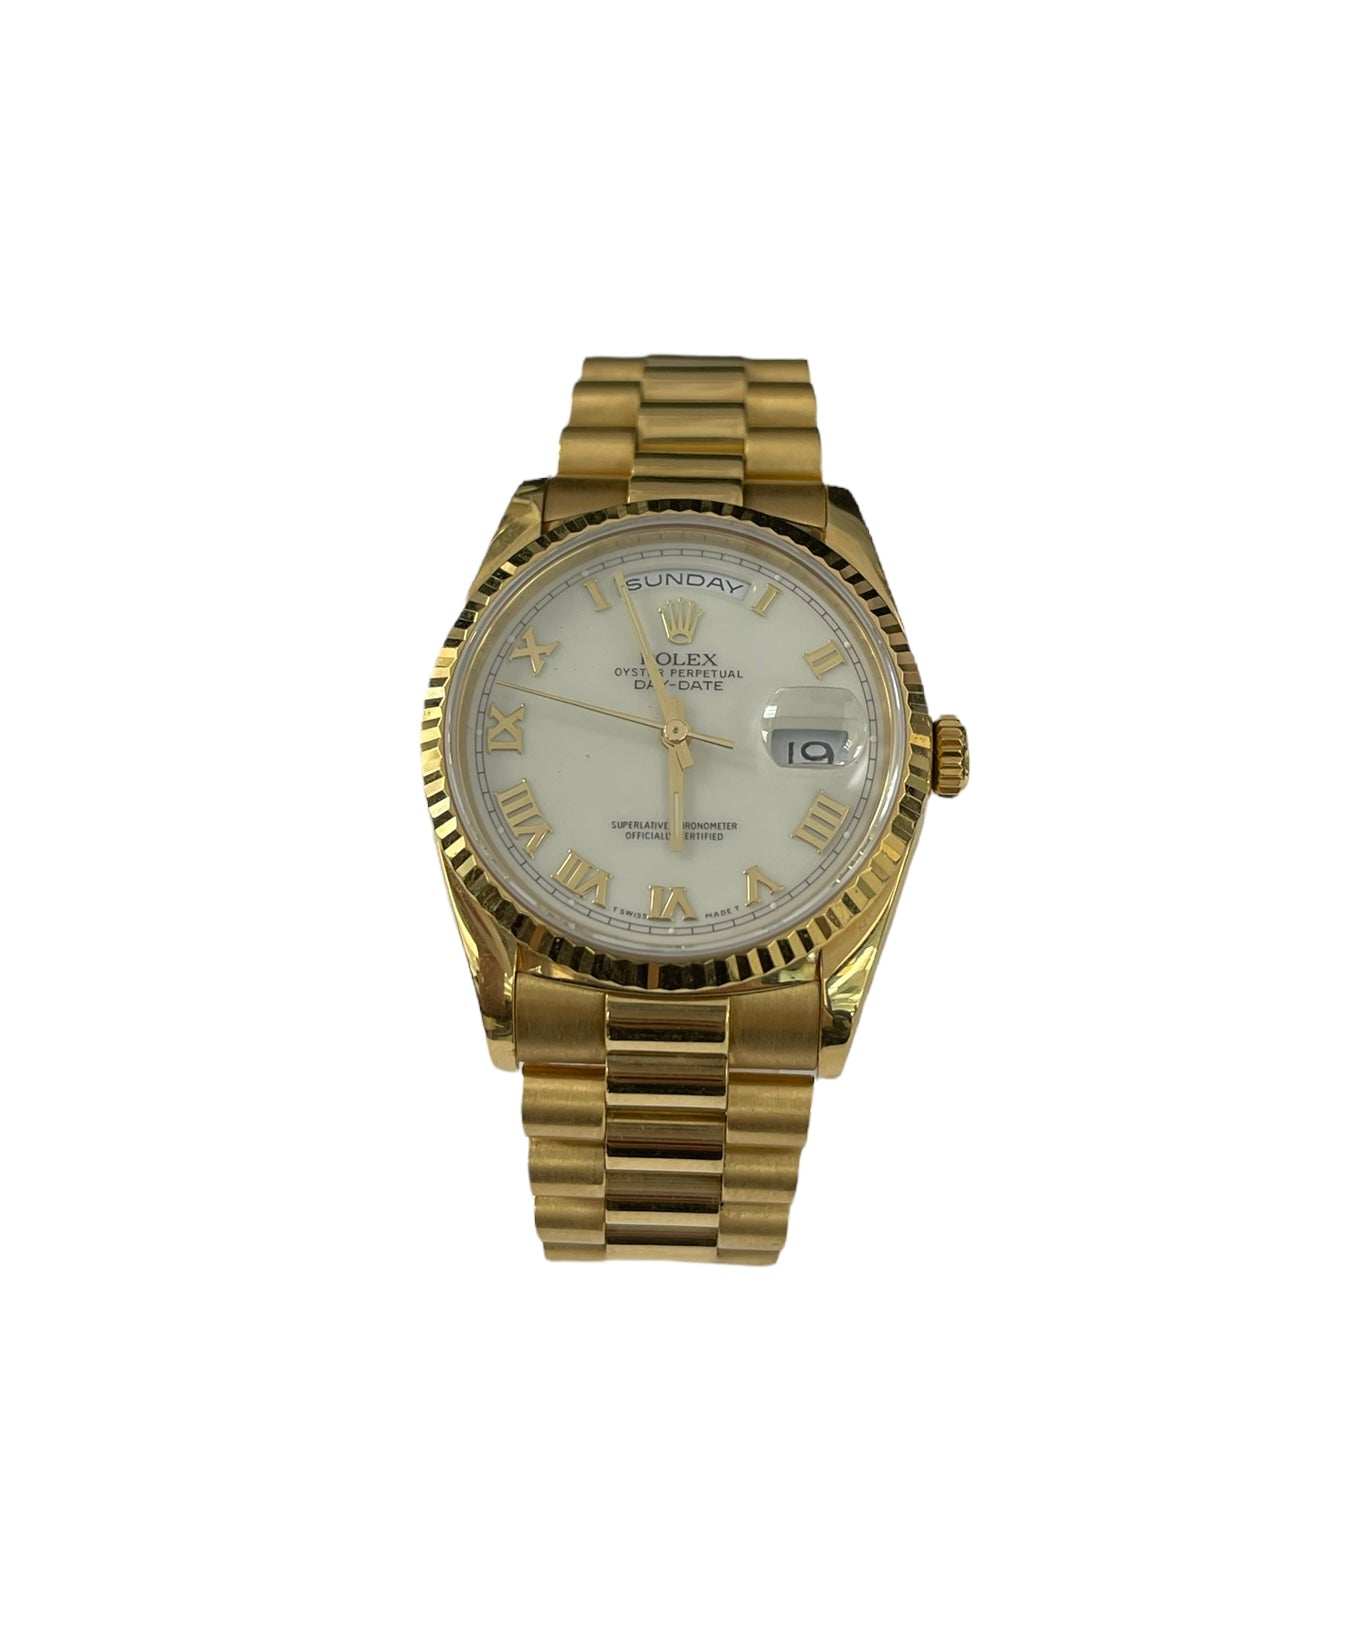 Rolex Day Date President Factory Roman Dial 18K Yellow Gold 36mm 18238